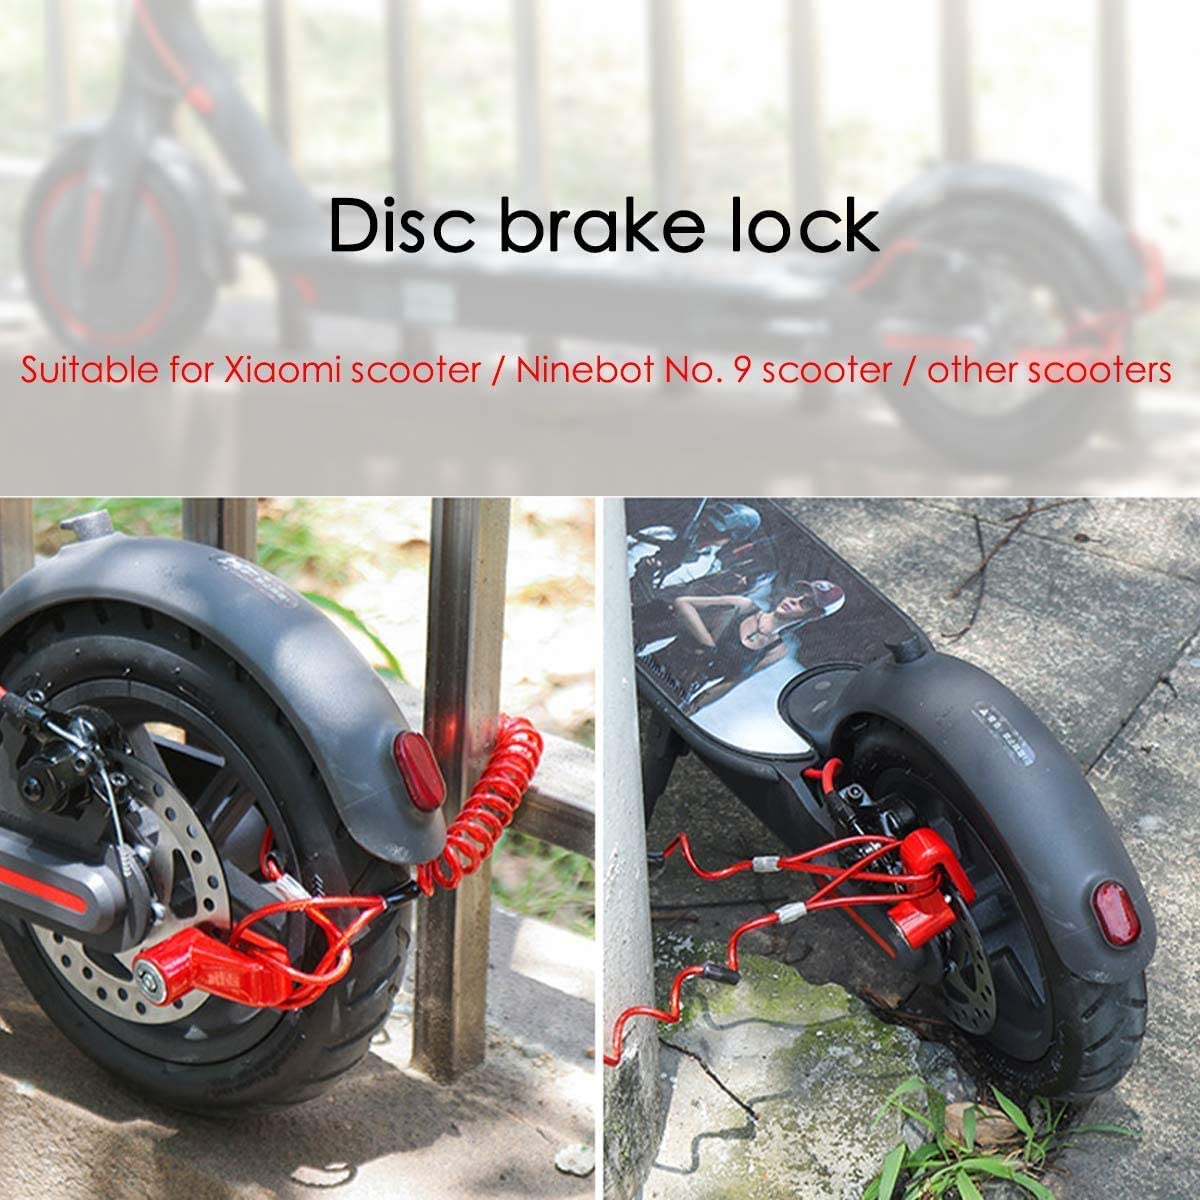 disc brake lock for all types of electric scooters